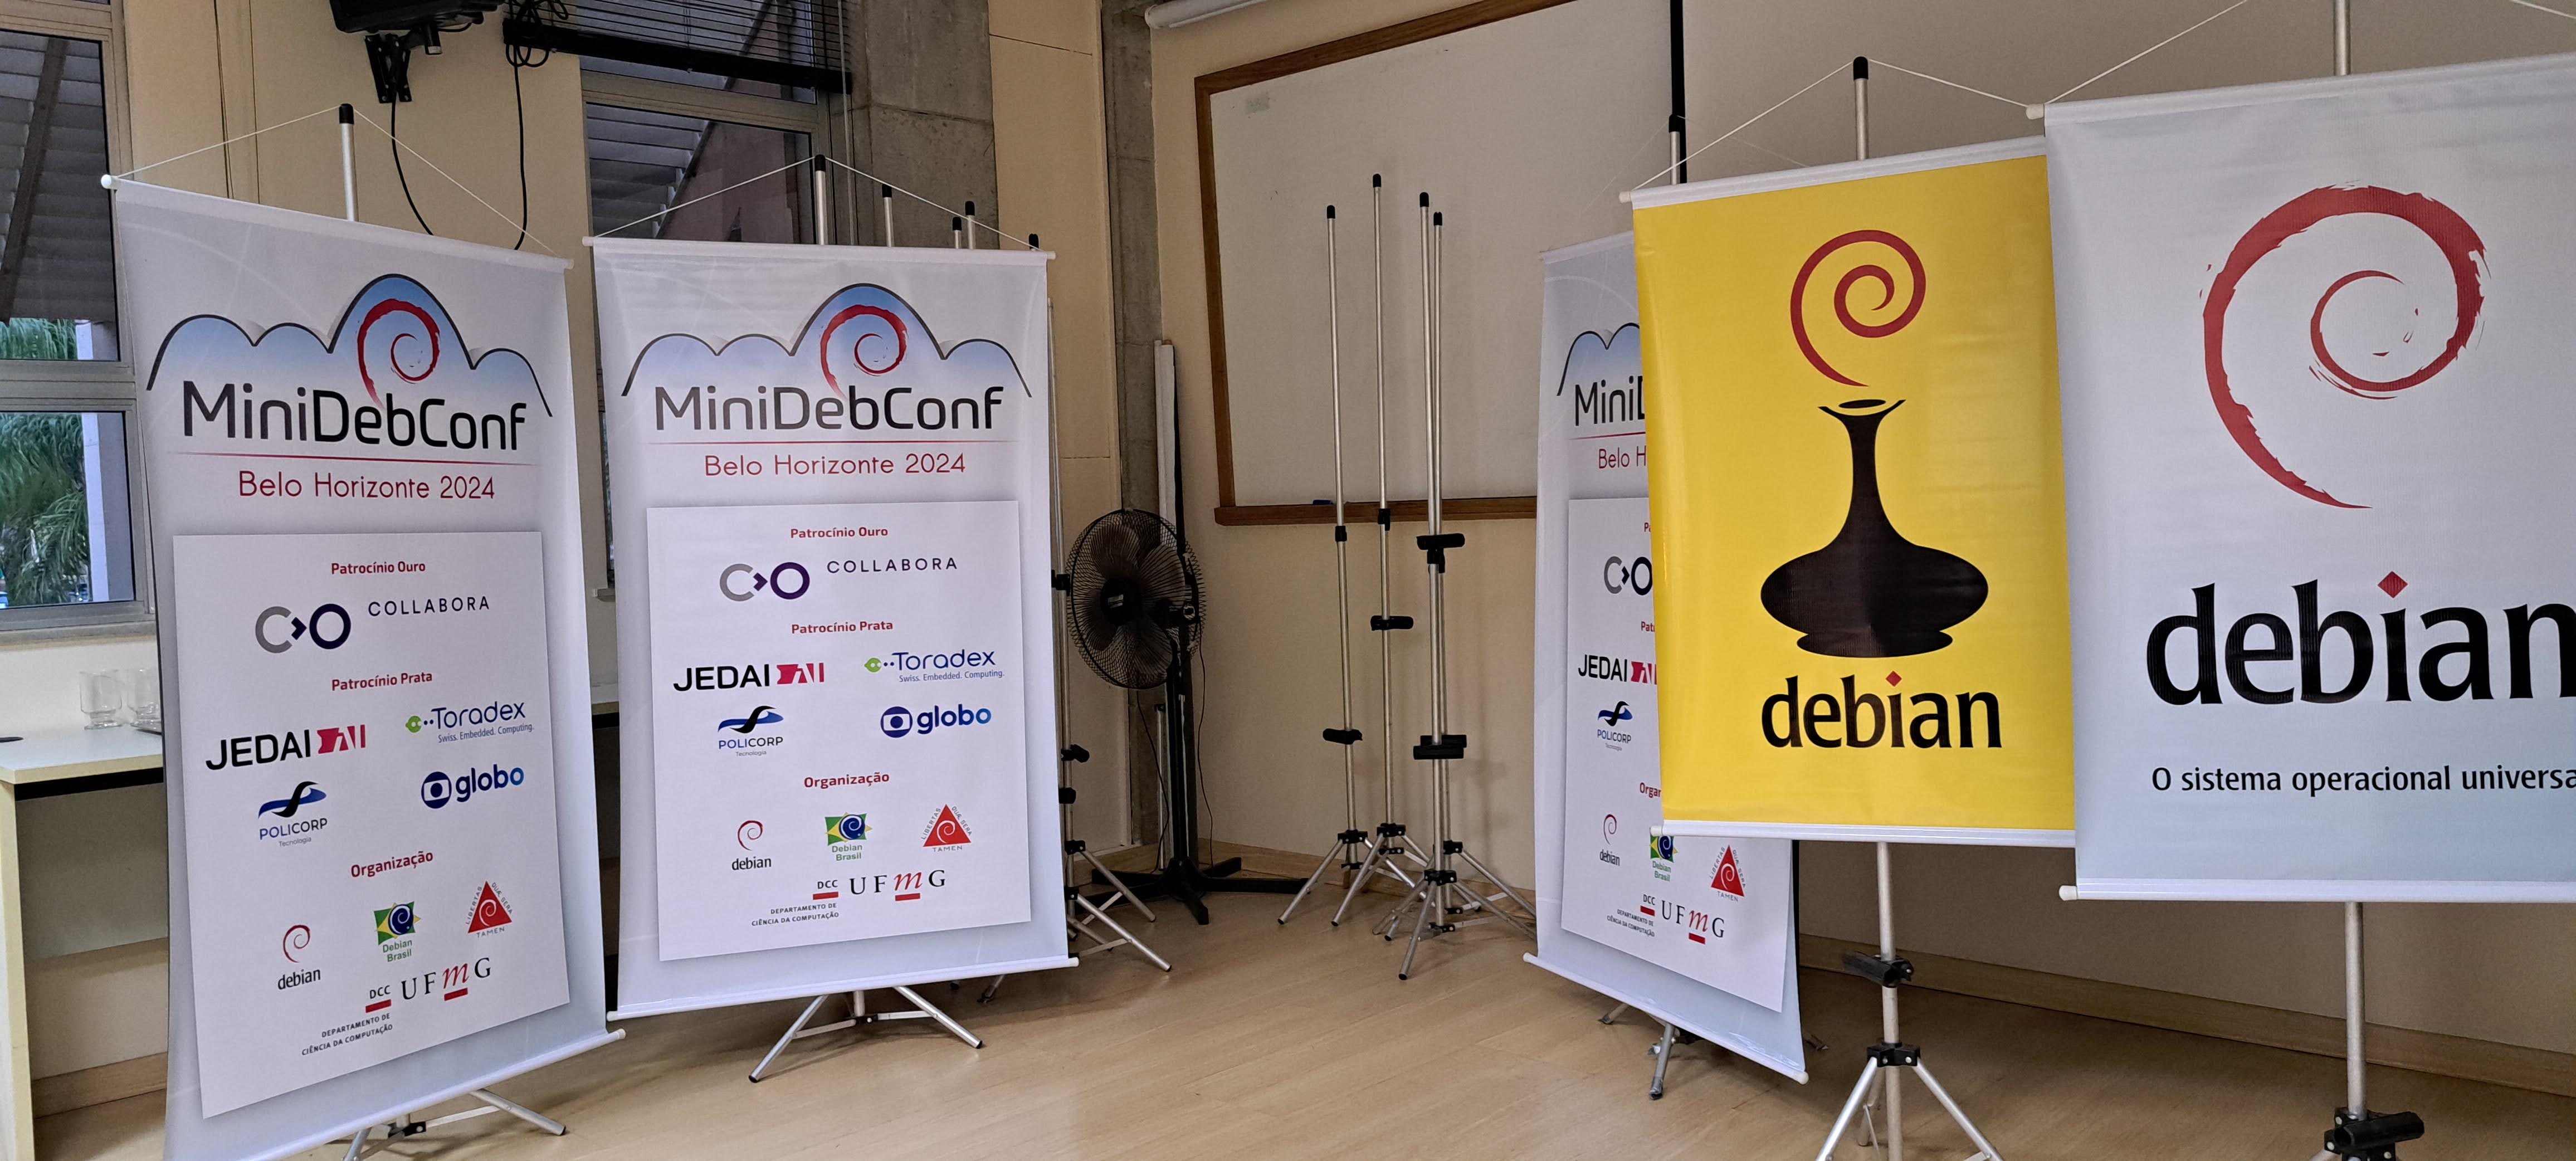 MiniDebConf BH 2024 banners